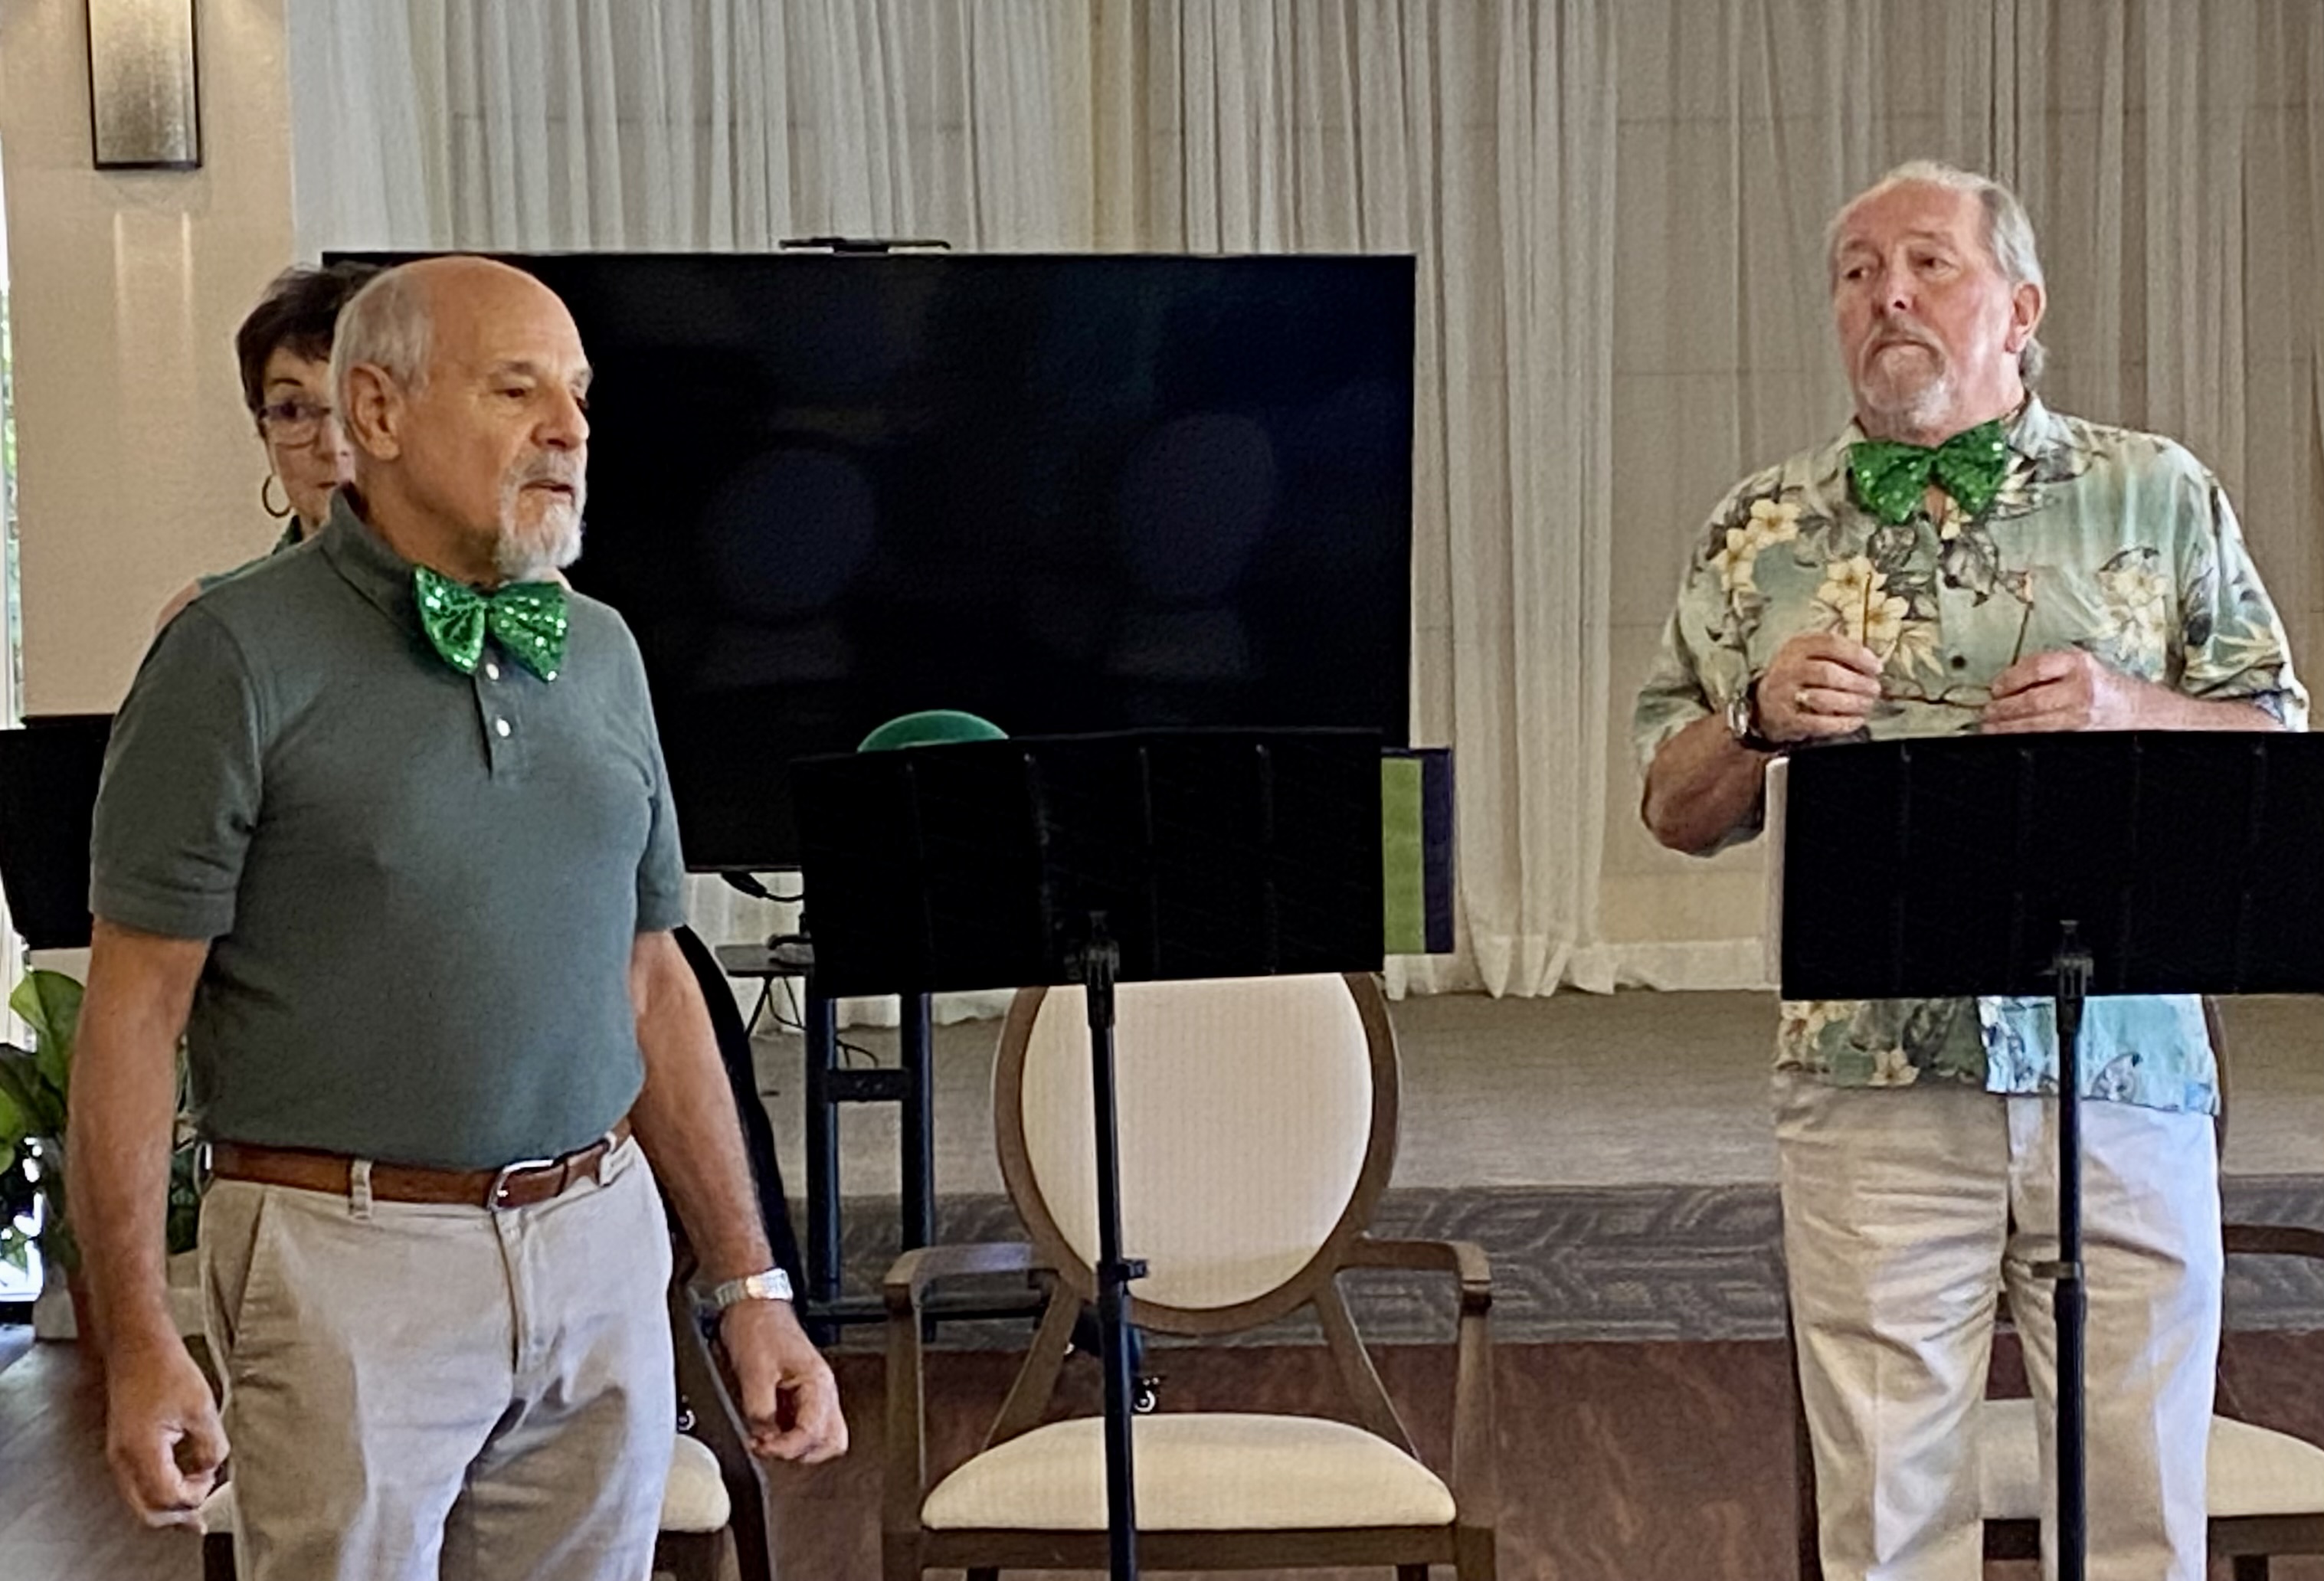 David Meyersburg and David Coe entertained at the St. Patrick's Day Luncheon.